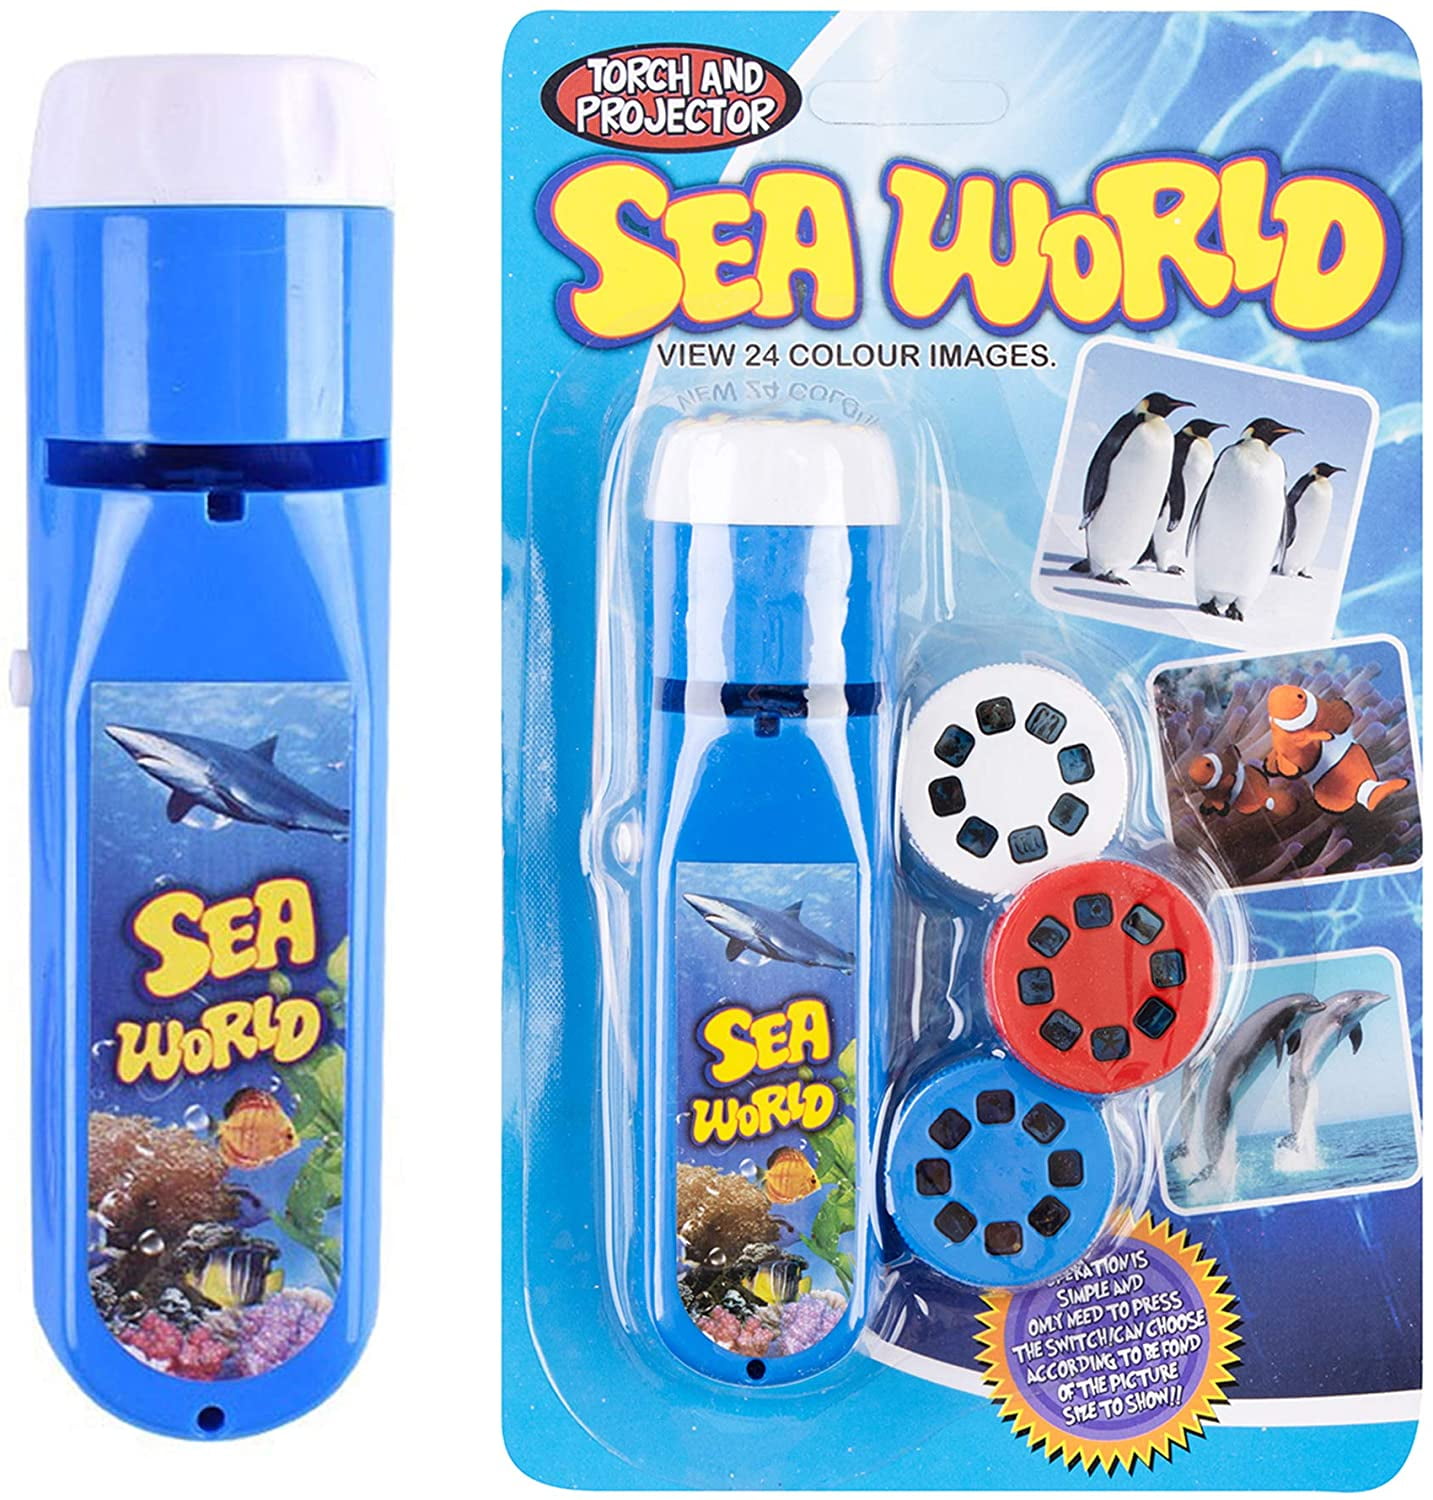 Kid educational sea creatures torch Projector gift toy Fun child play/learn game 